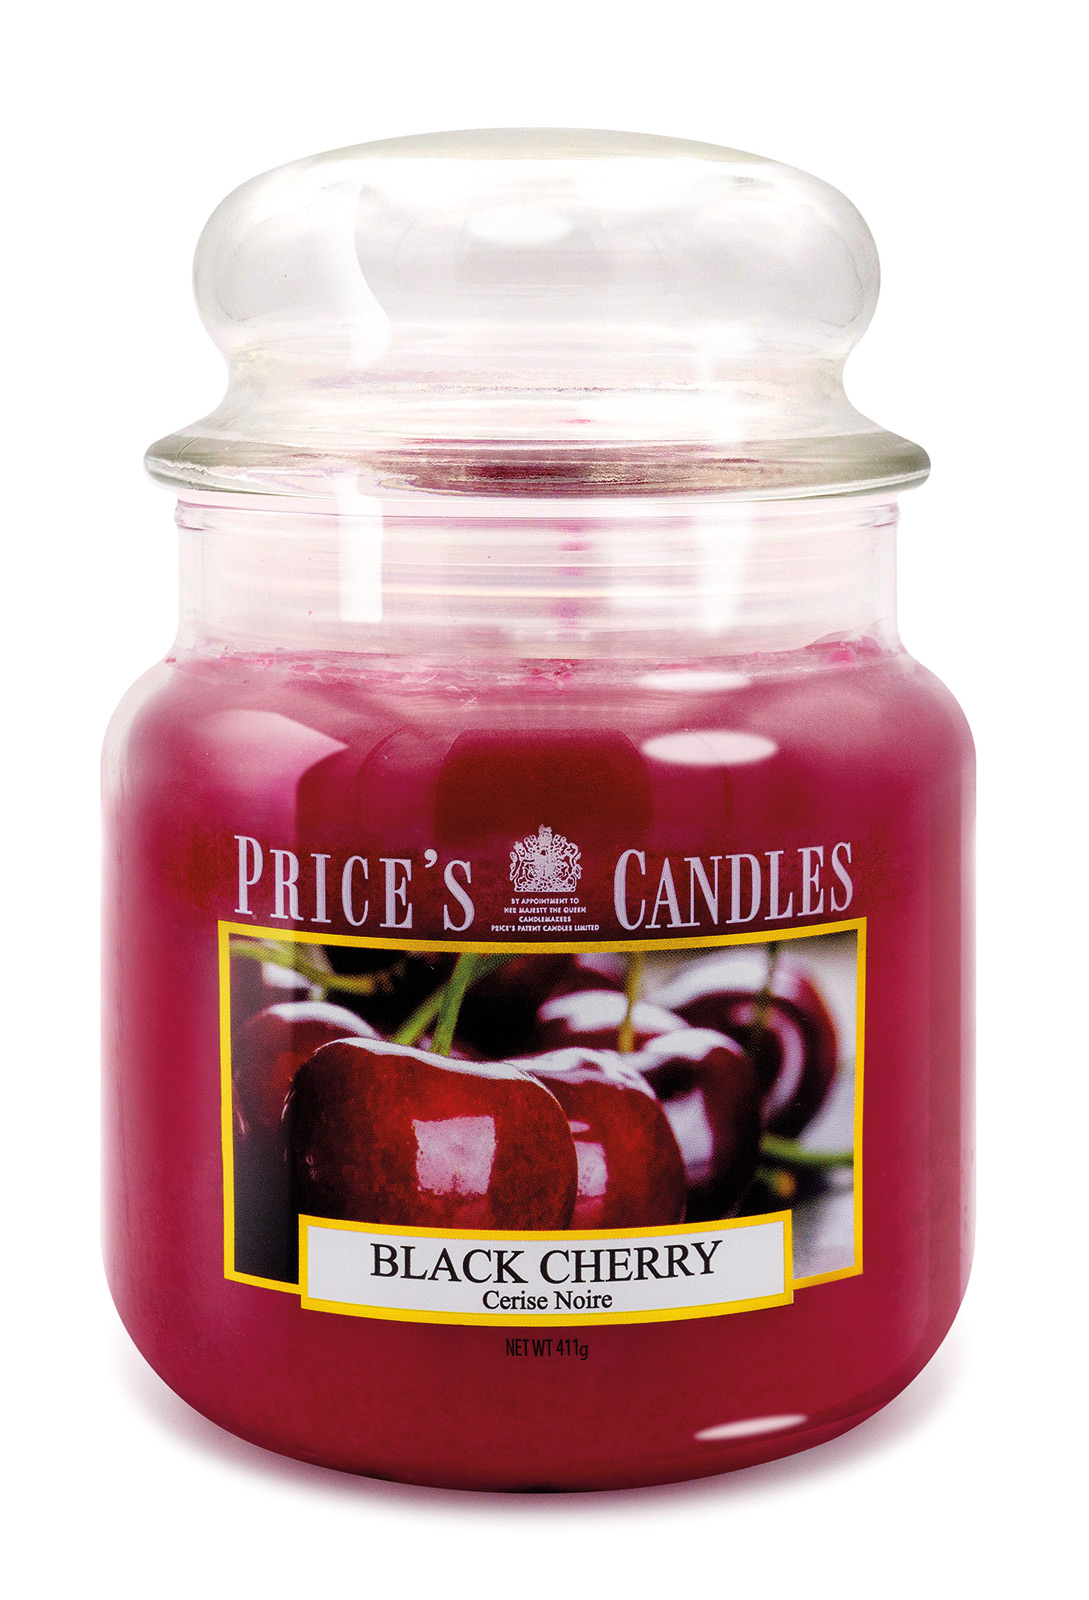 Prices Candle "Black Cherry" 411g 